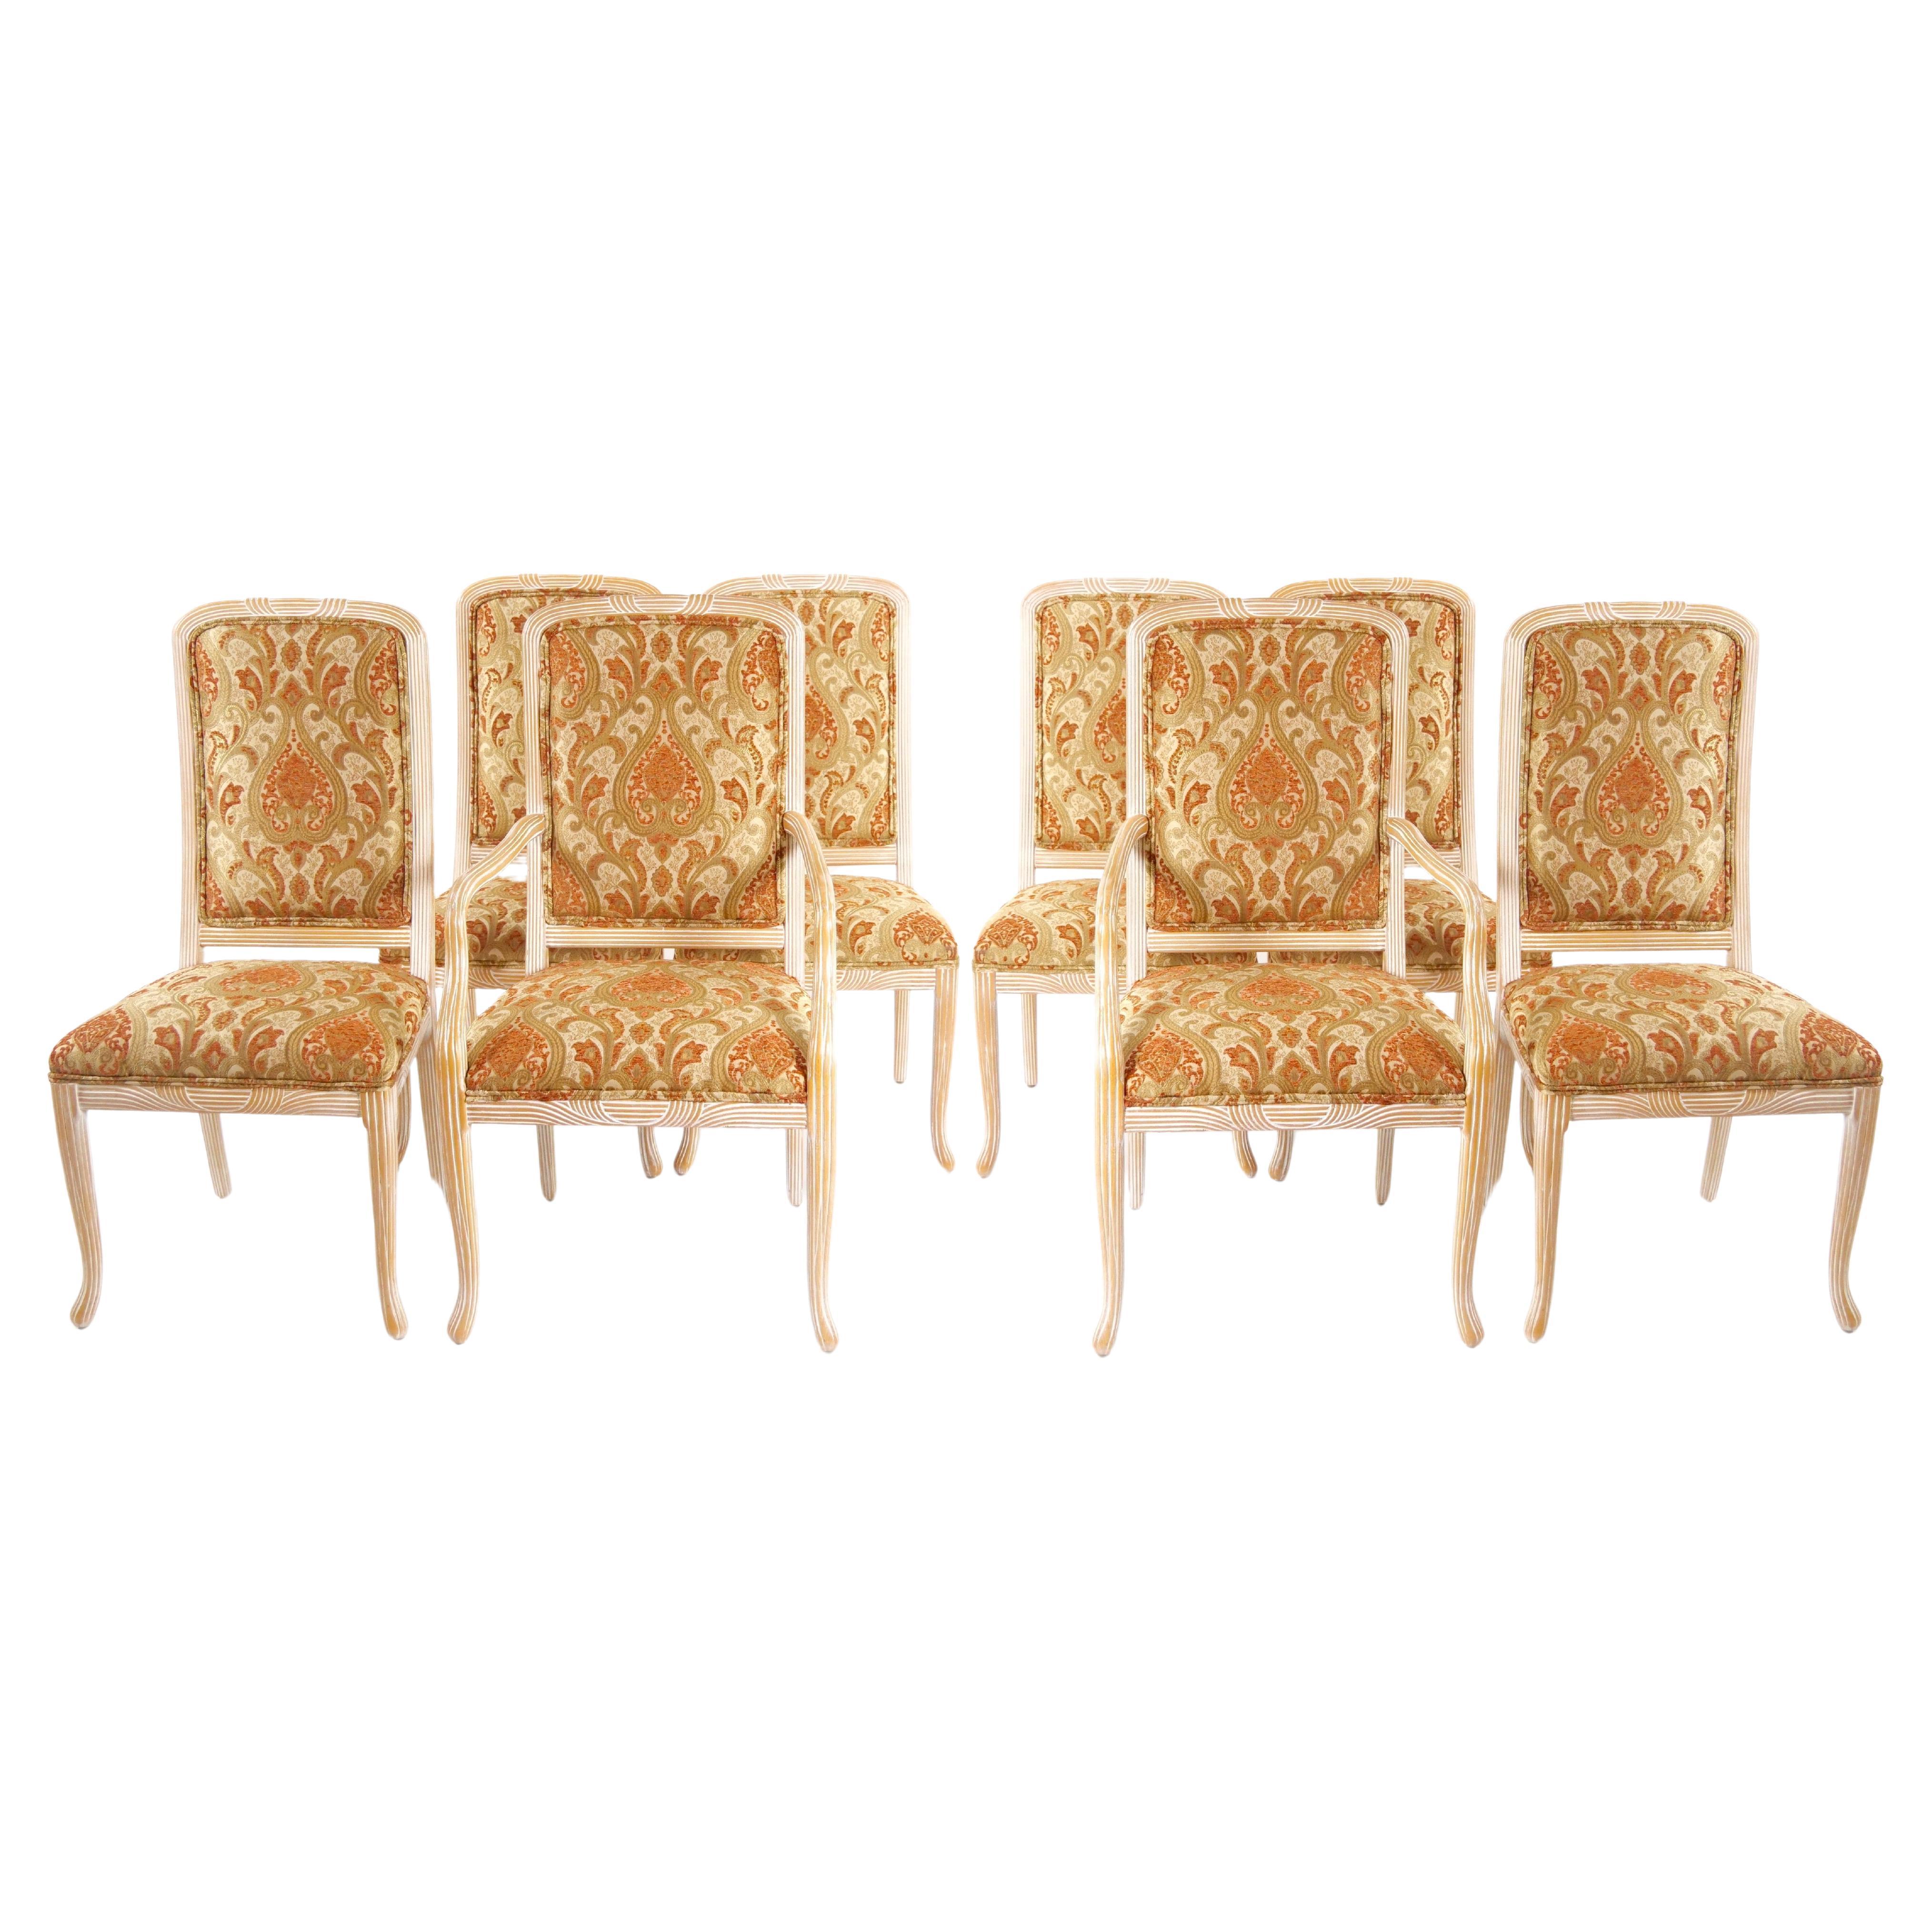 Italian Hand Painted / Carved Upholstered Dining Room Chair Set For Sale